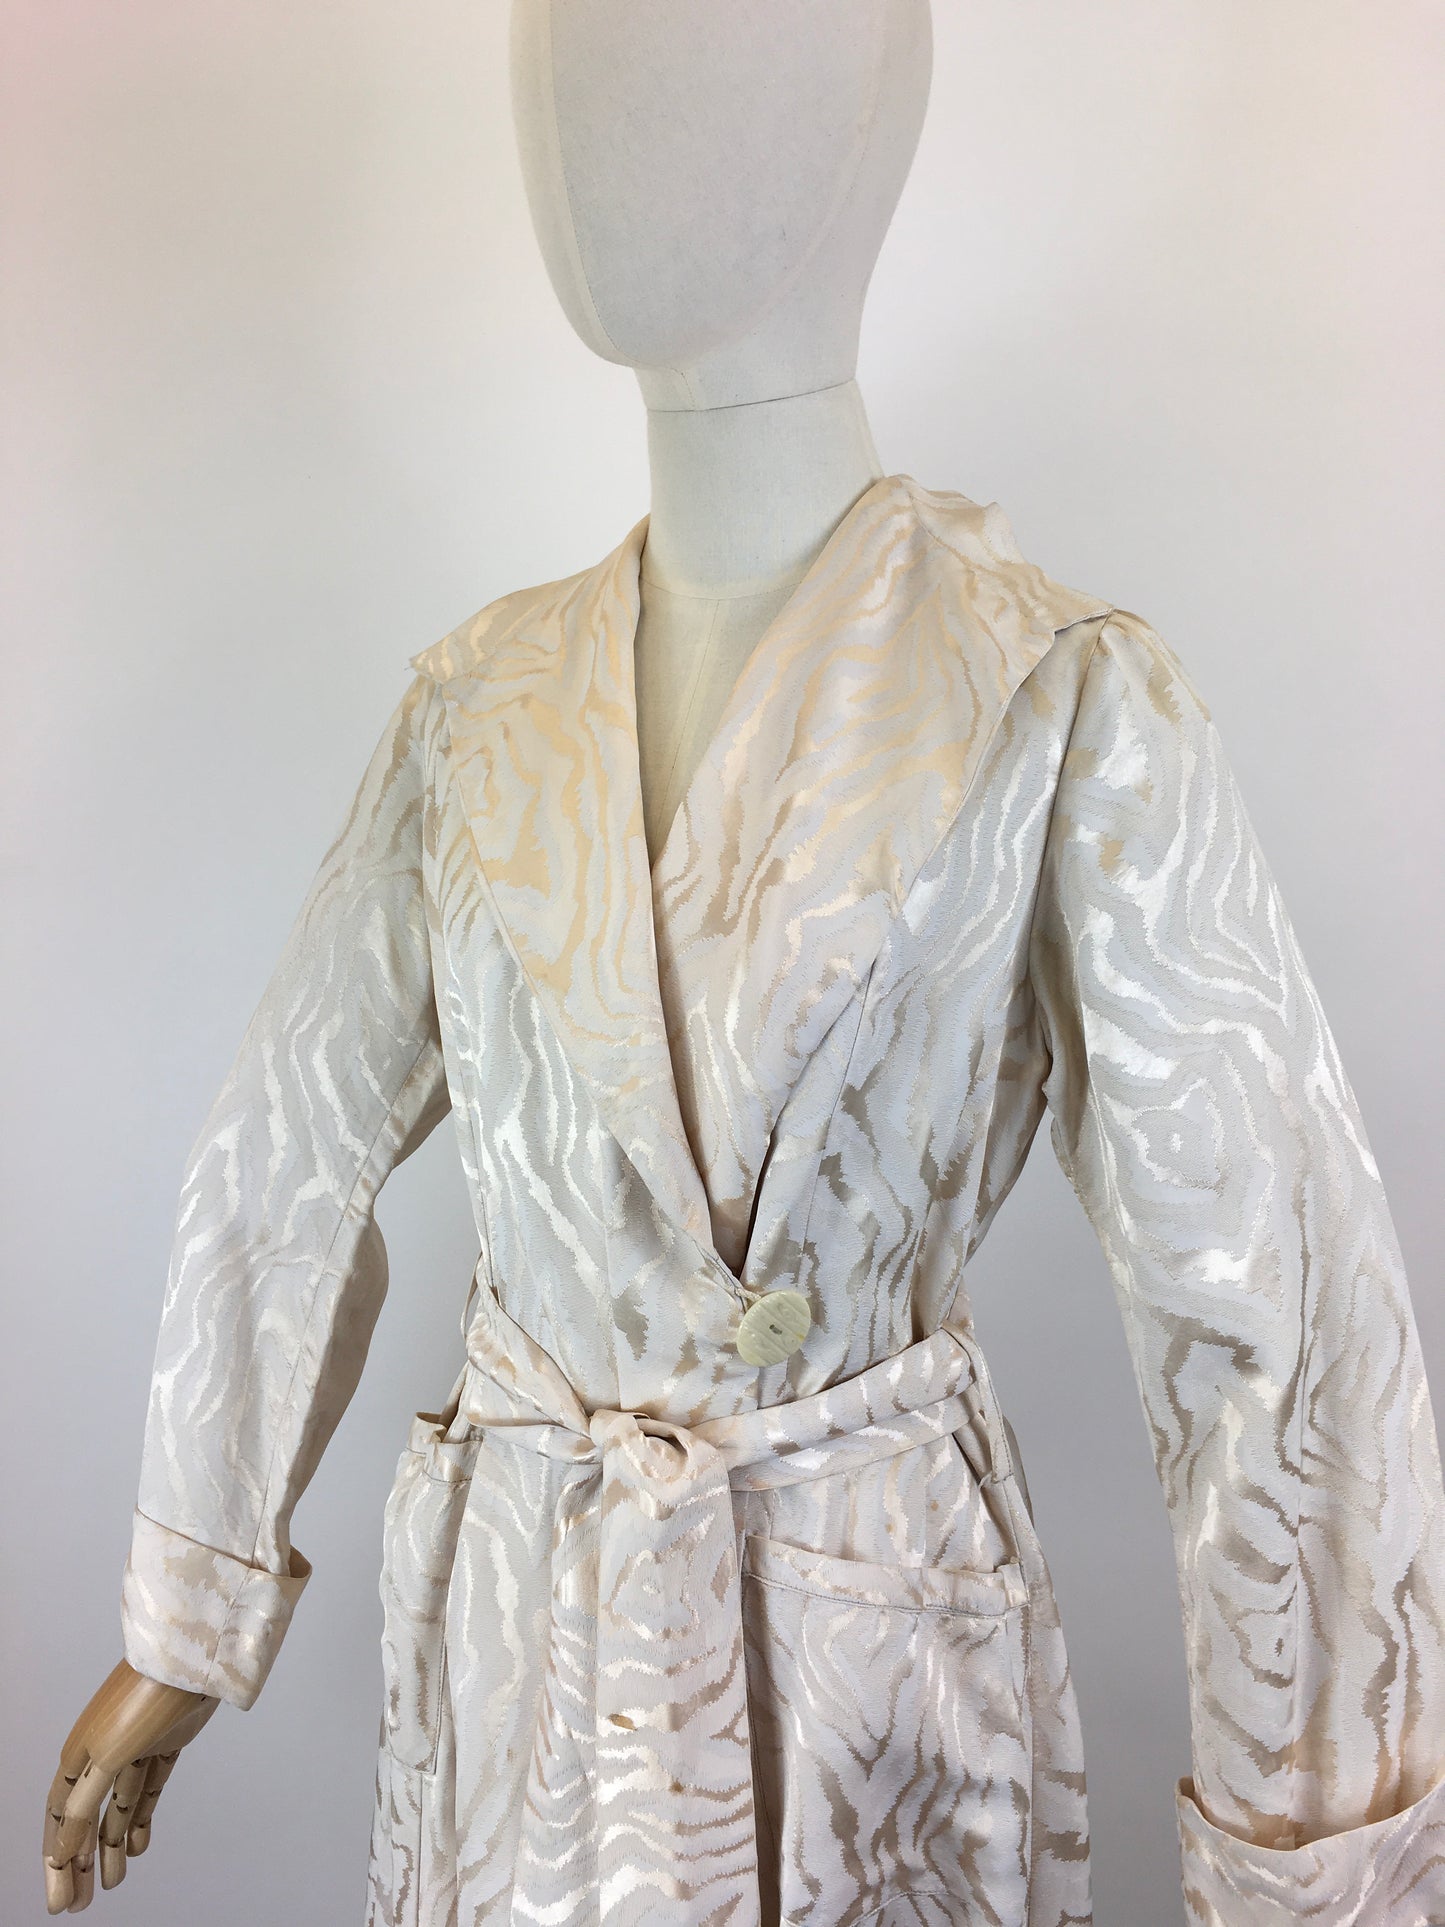 Original 1940’s Stunning Housecoat - In A Cream & Gold Printed Brocade with Tasseled Belt